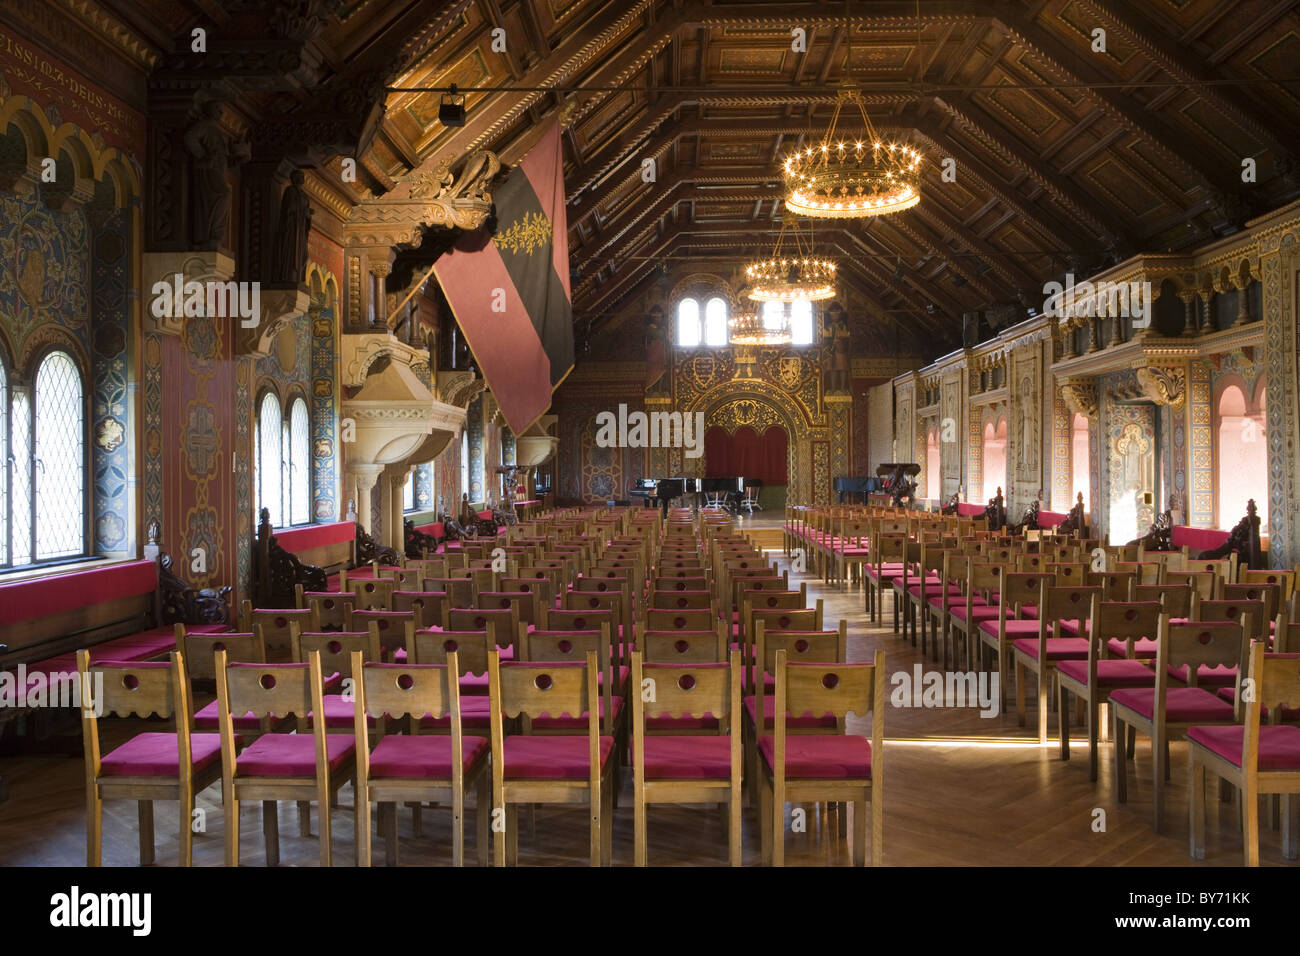 Festsaal festival hall in Wartburg medieval castle, Eisenach, Thuringia, Germany, Europe Stock Photo